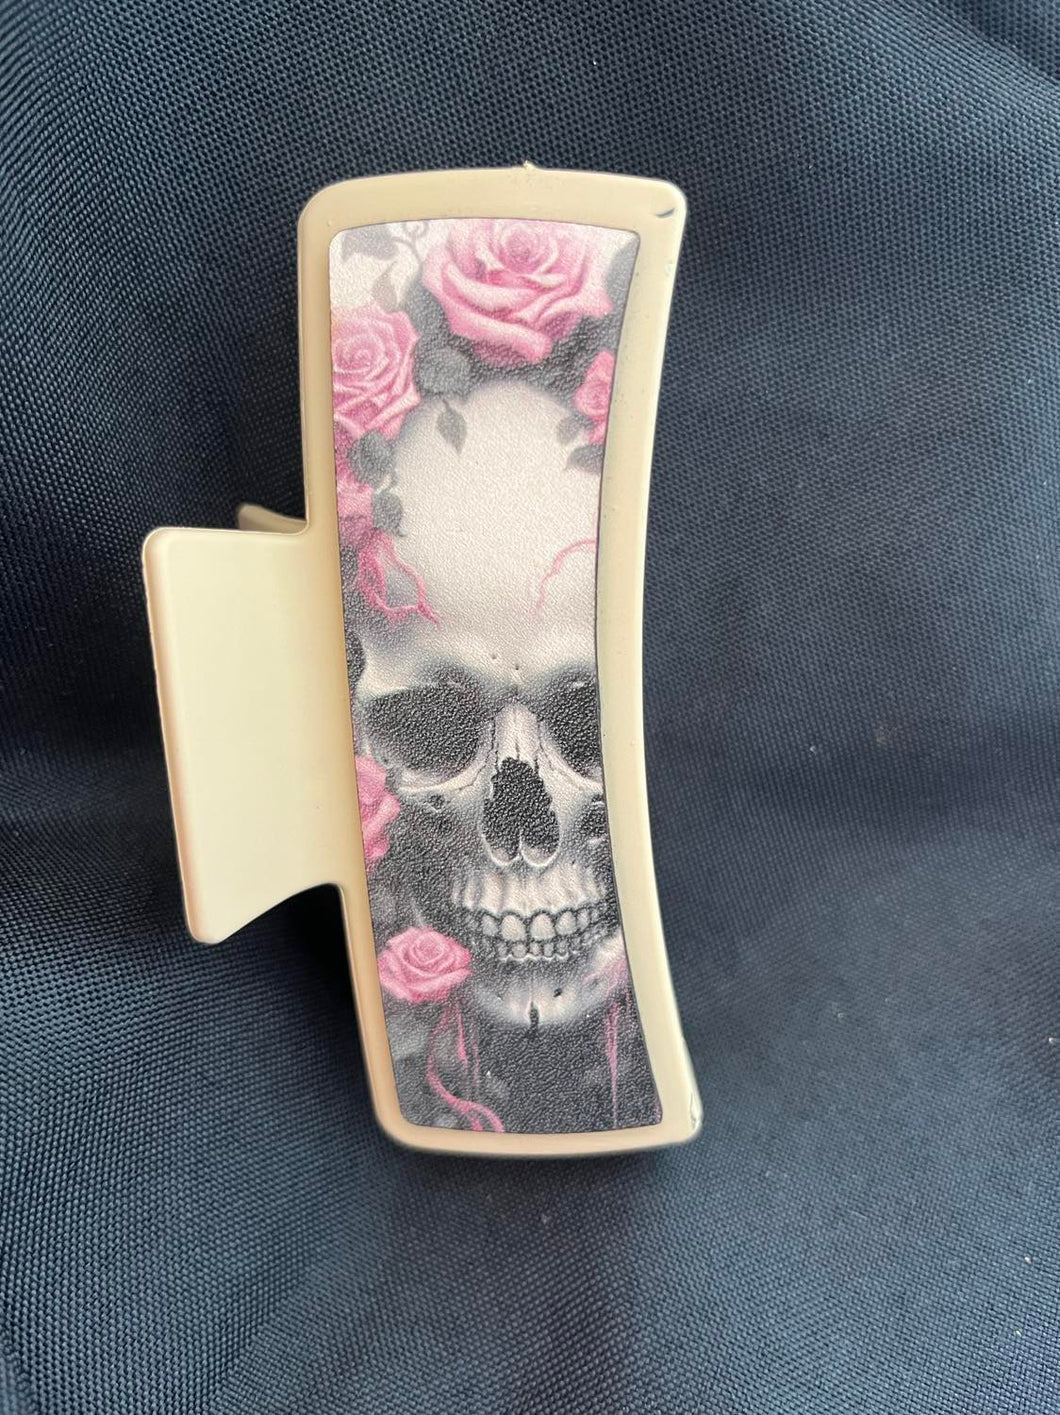 Skull Printed Leather For Hair Clip